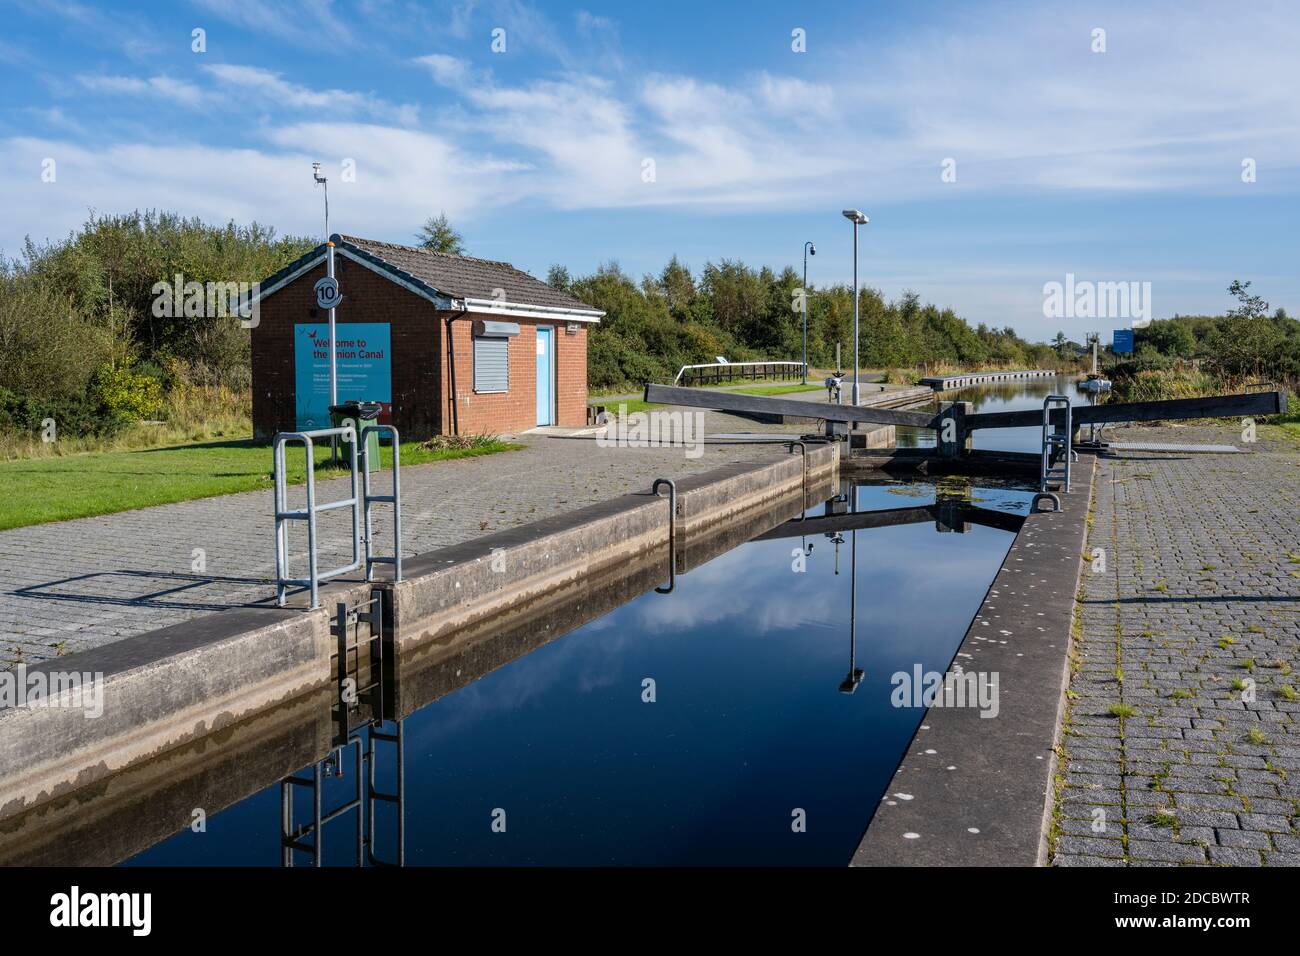 Lock 9 on the Union Canal, the final lock at the Falkirk Wheel end of the canal, in Falkirk, Scotland, UK Stock Photo